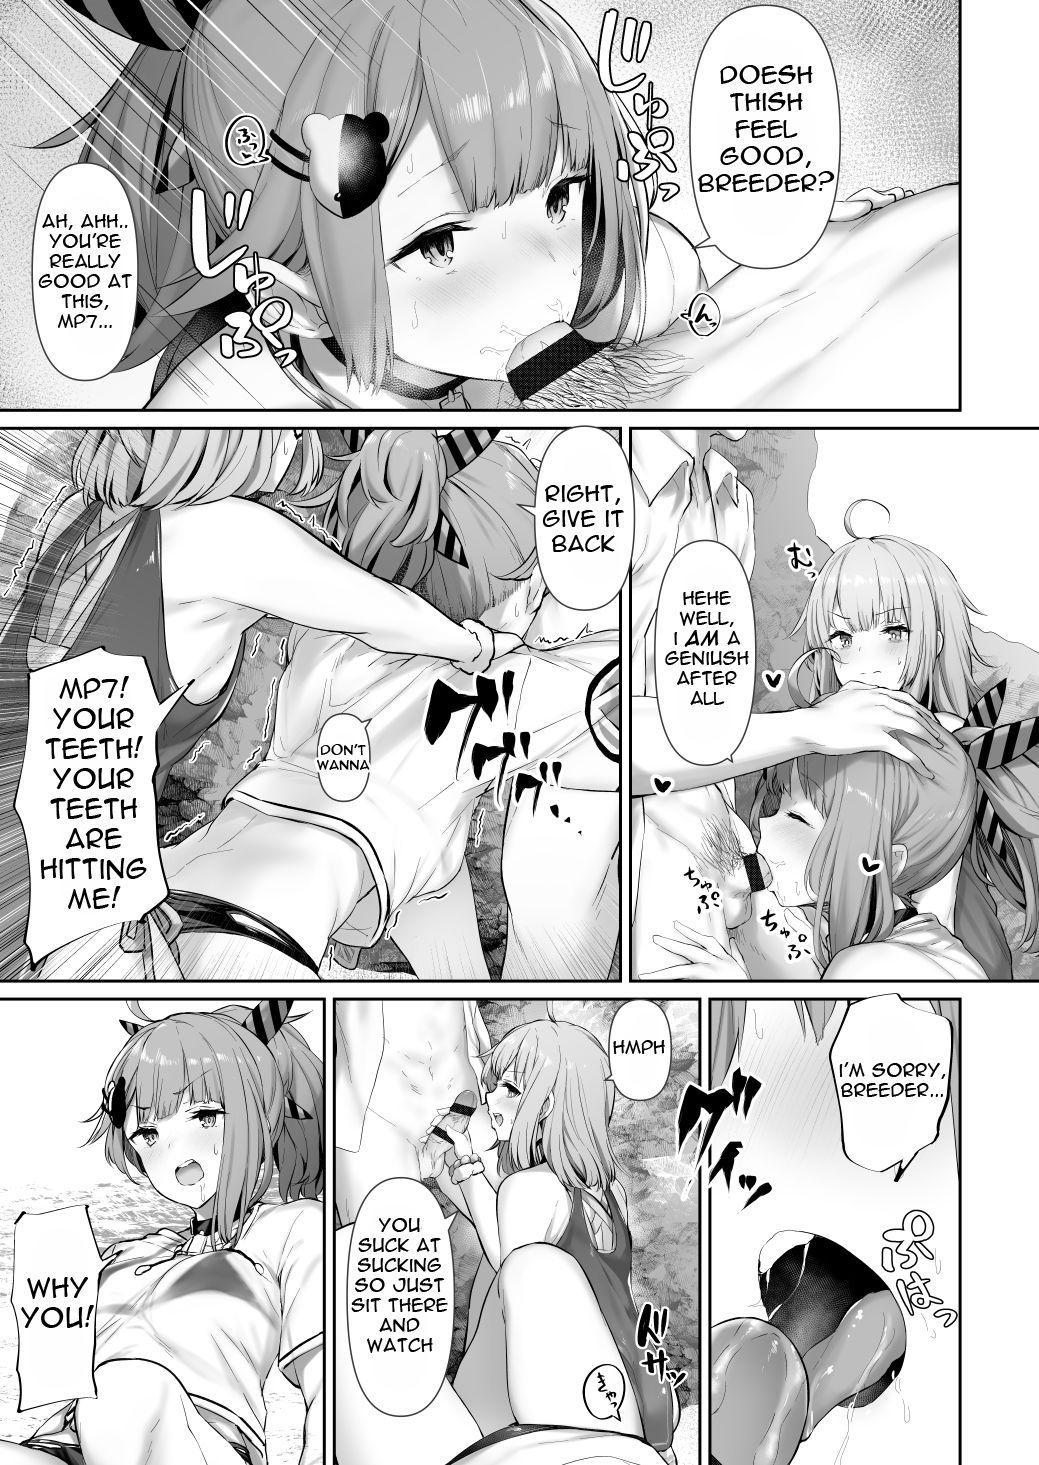 Camera MP7 and AA-12 no - Girls frontline Spanish - Page 3